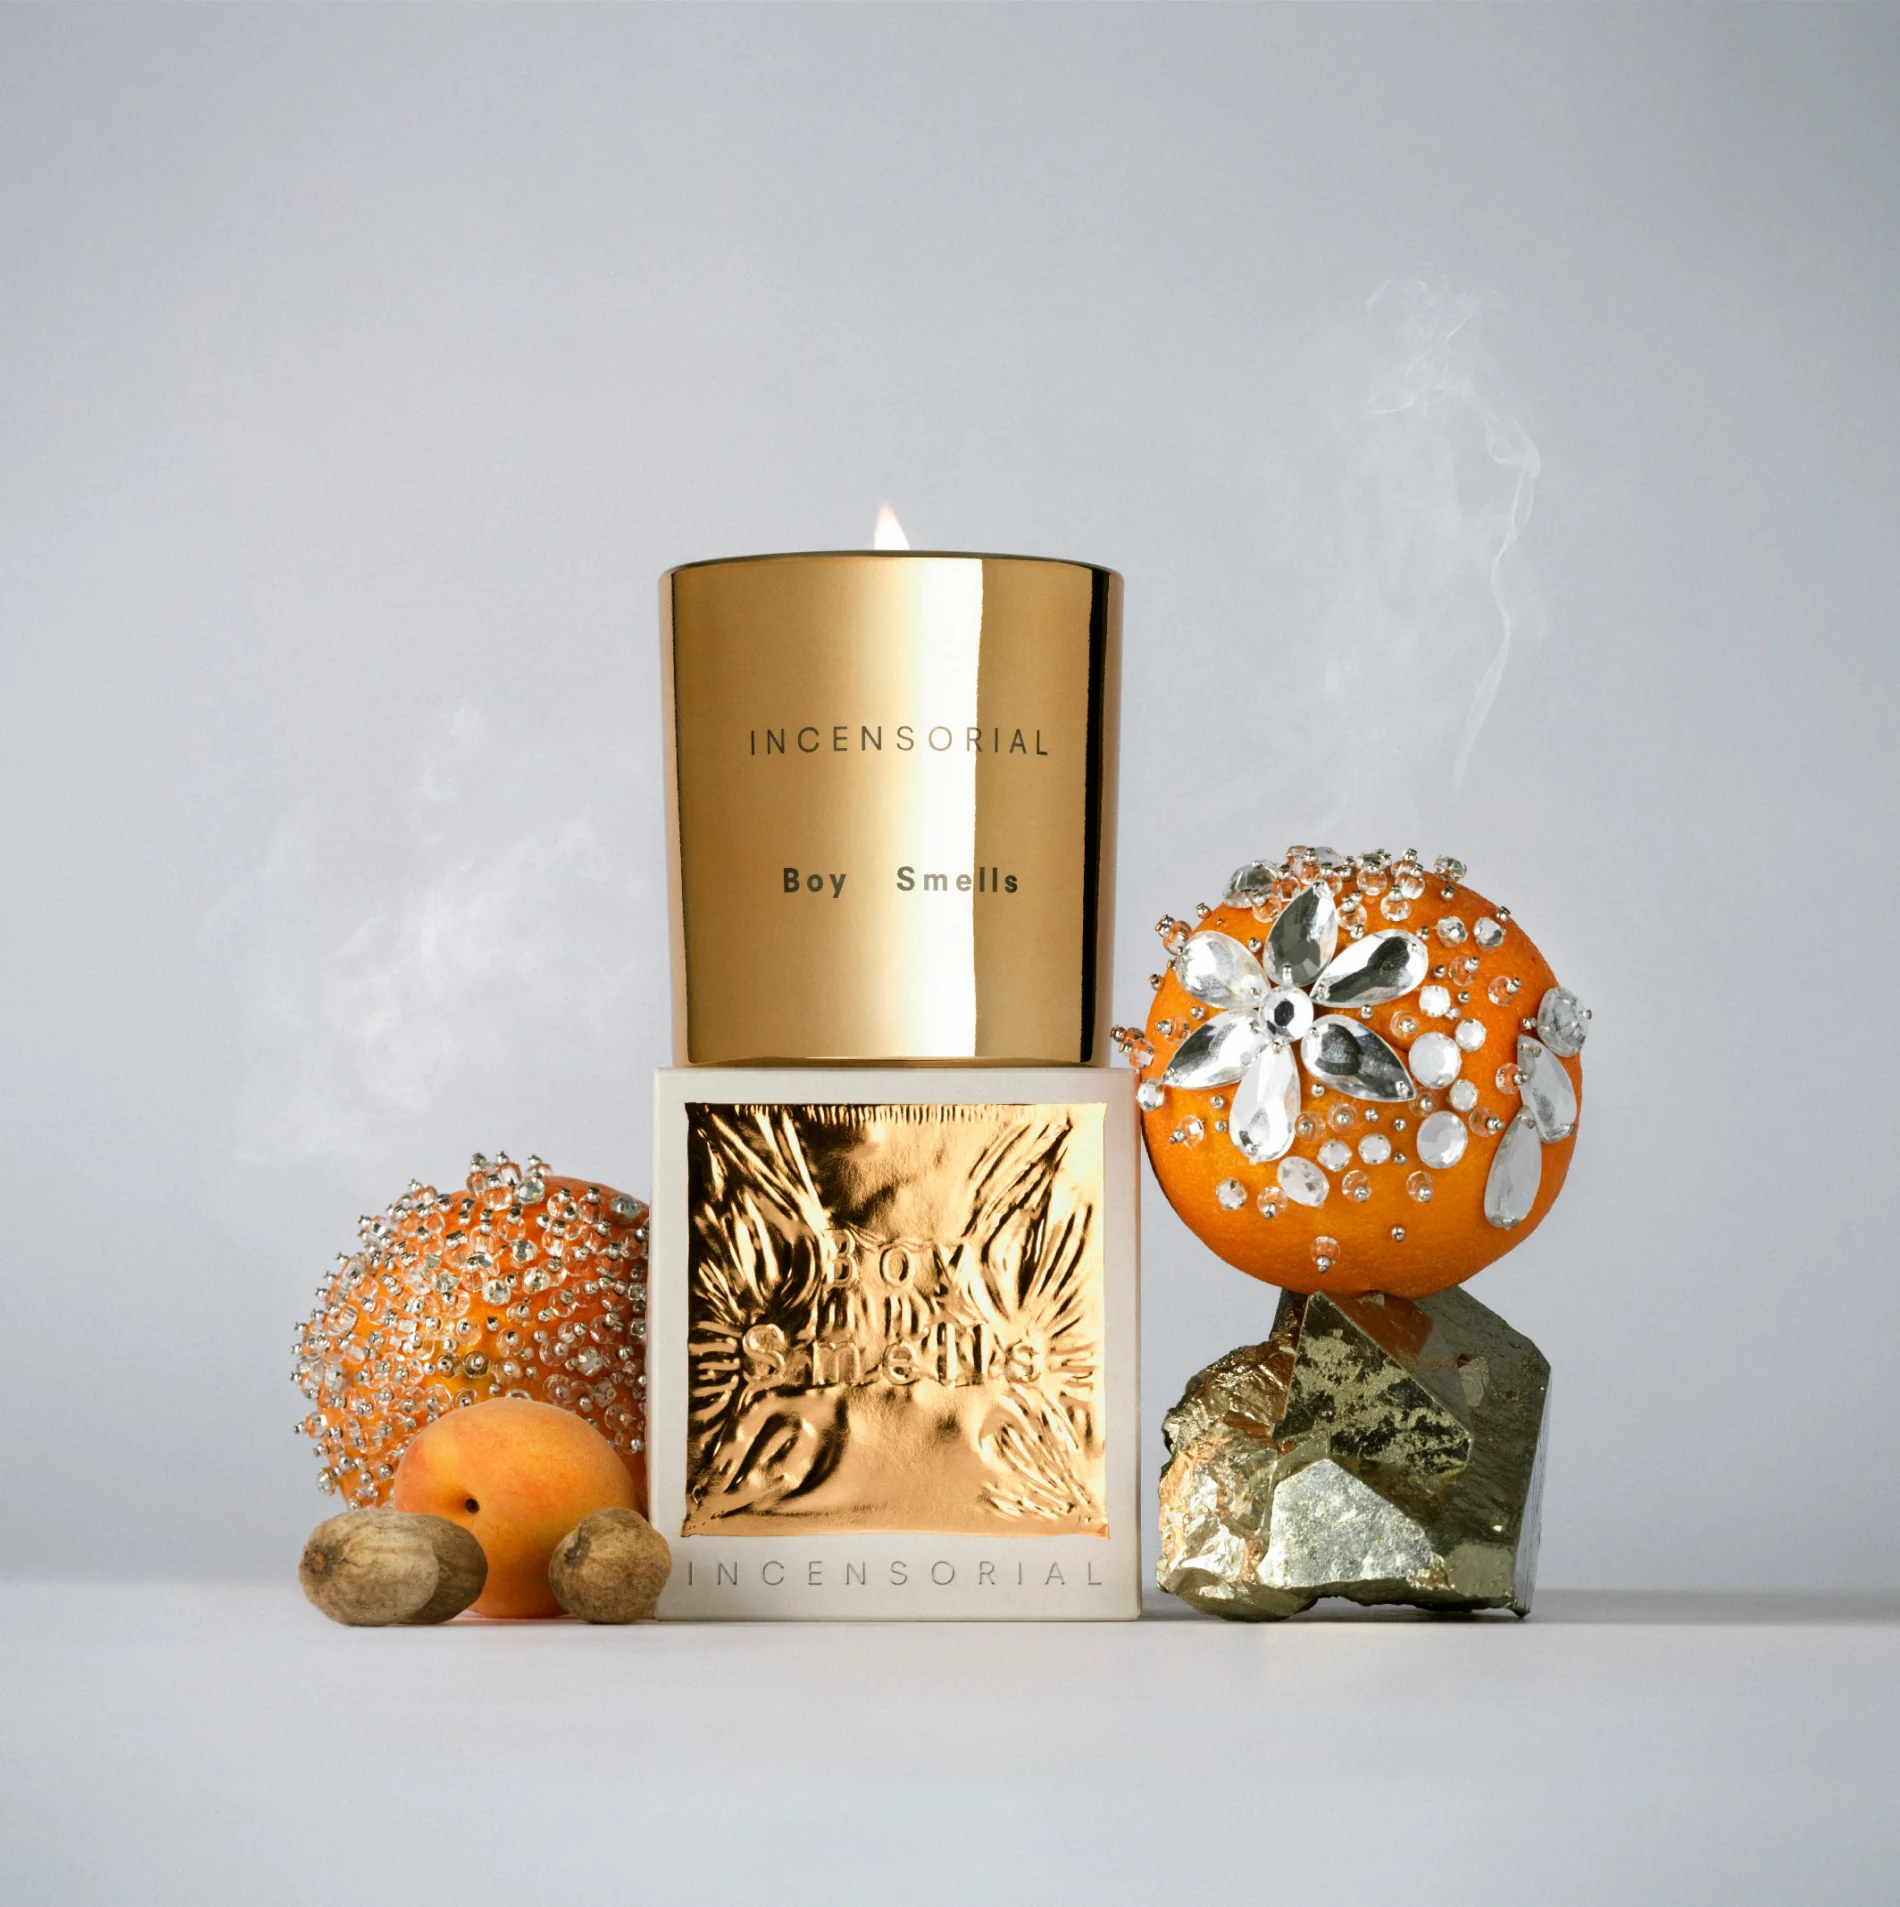 Incensorial Candle - Boy Smells Holiday Collection